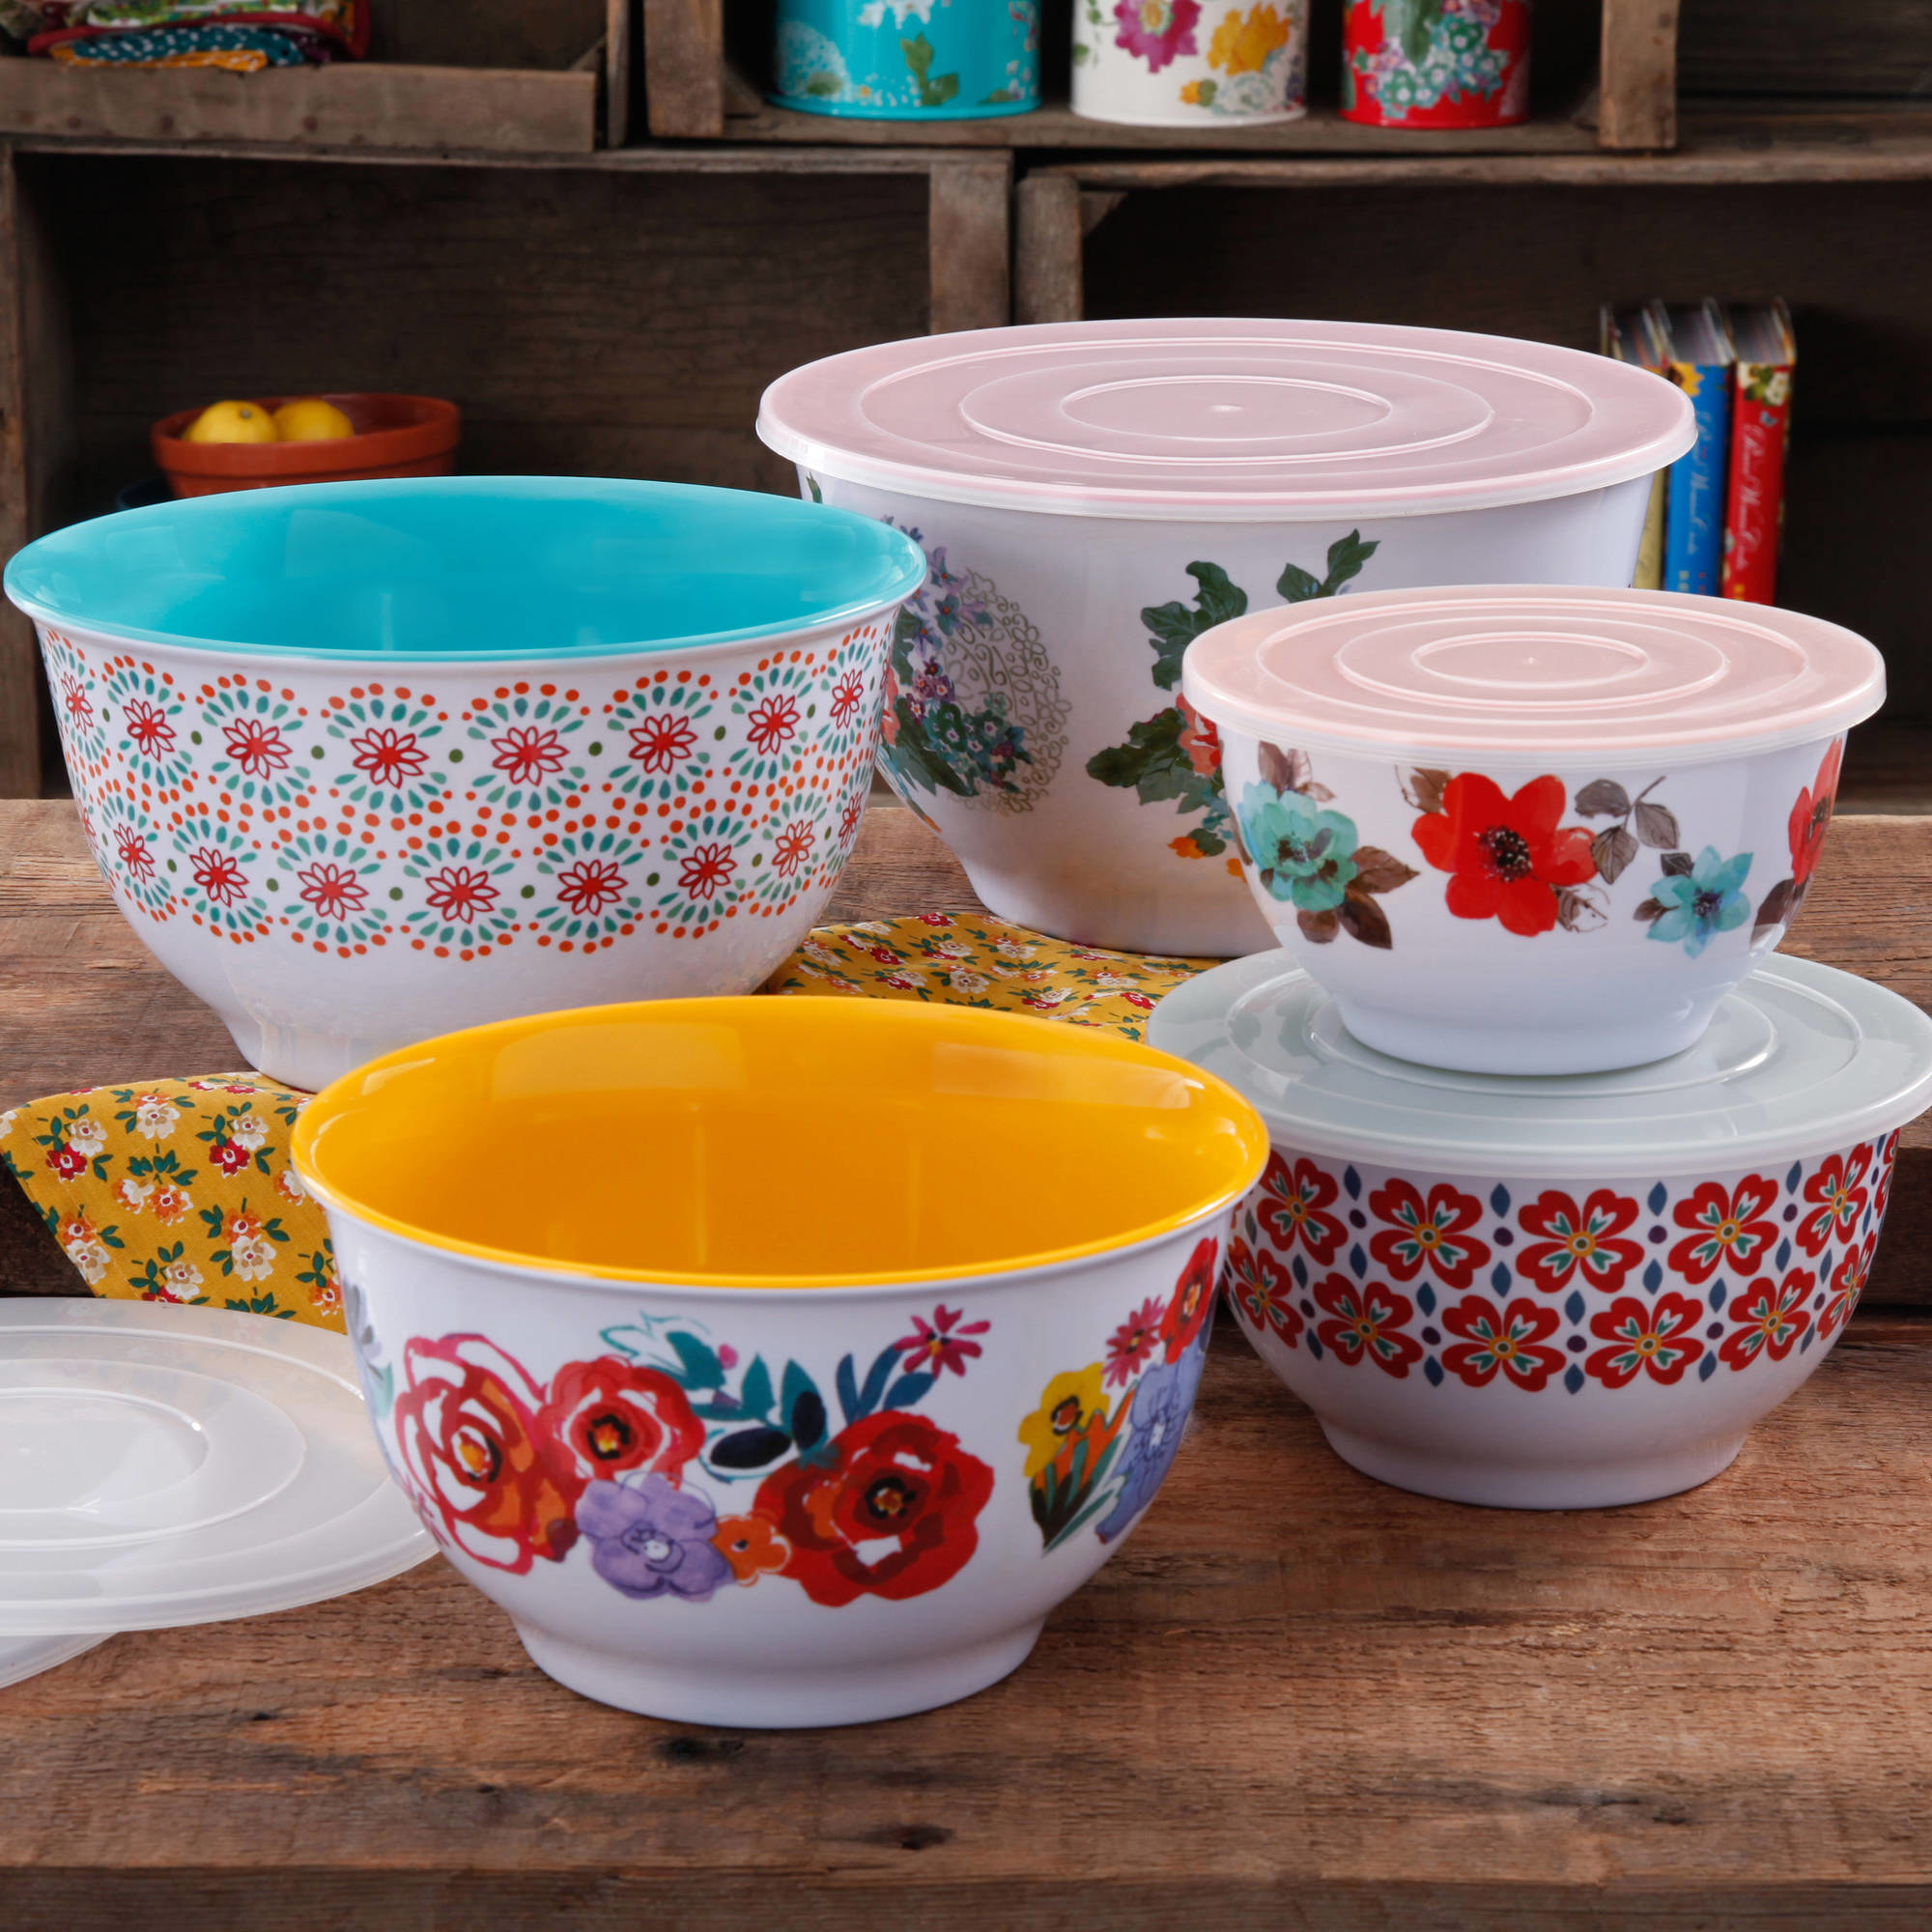 A set of colorful, floral bowls on a wooden counter